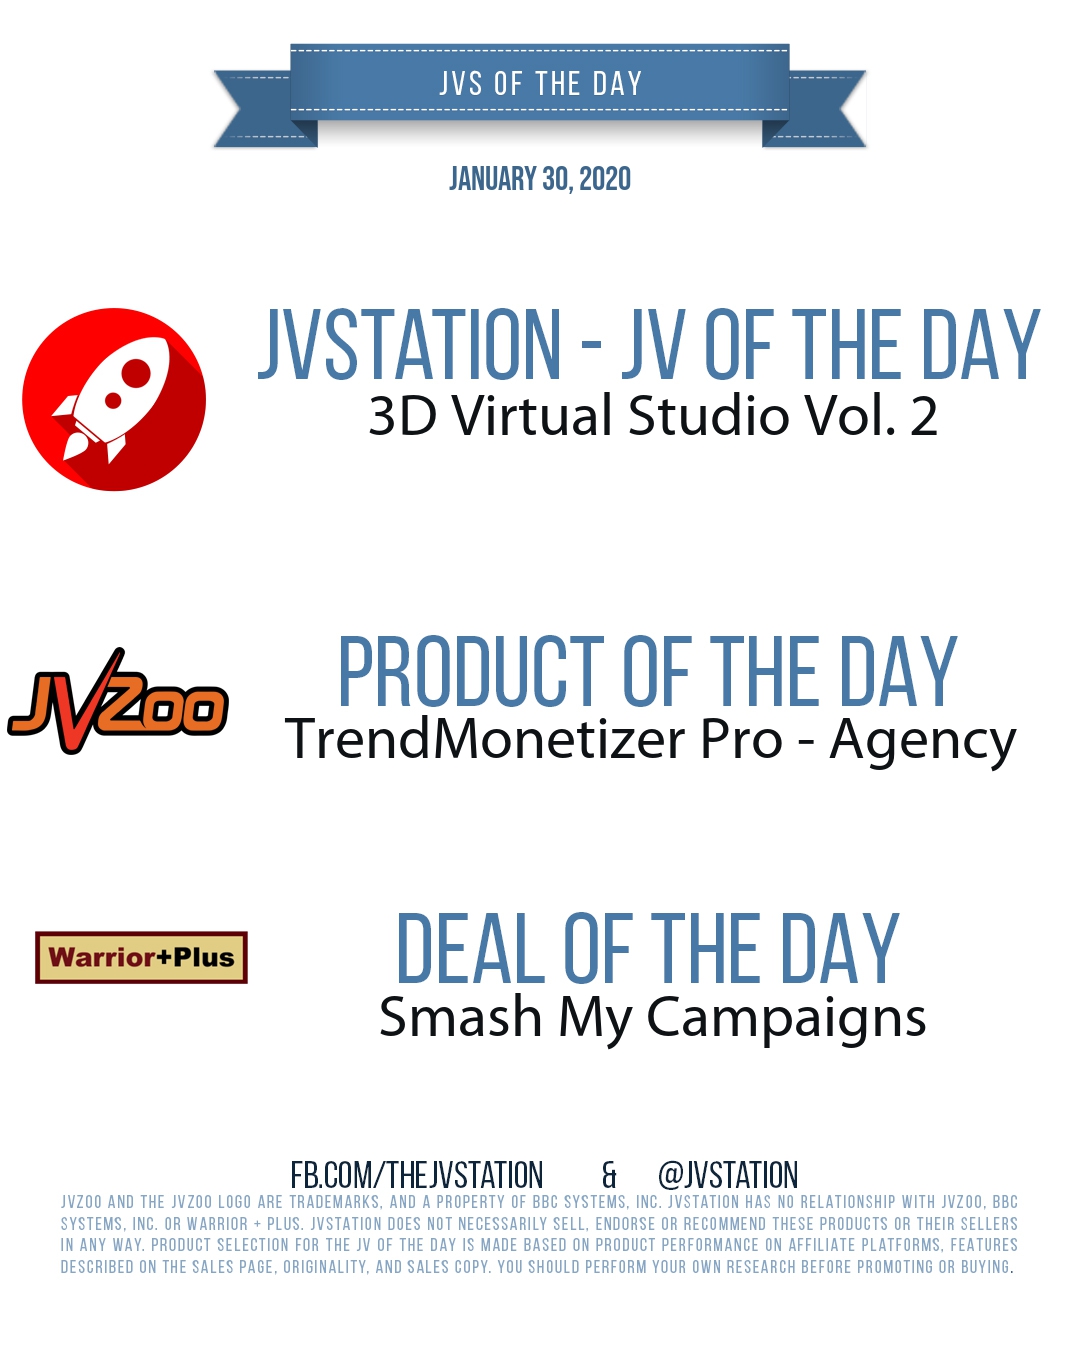 JVs of the day - January 30, 2020